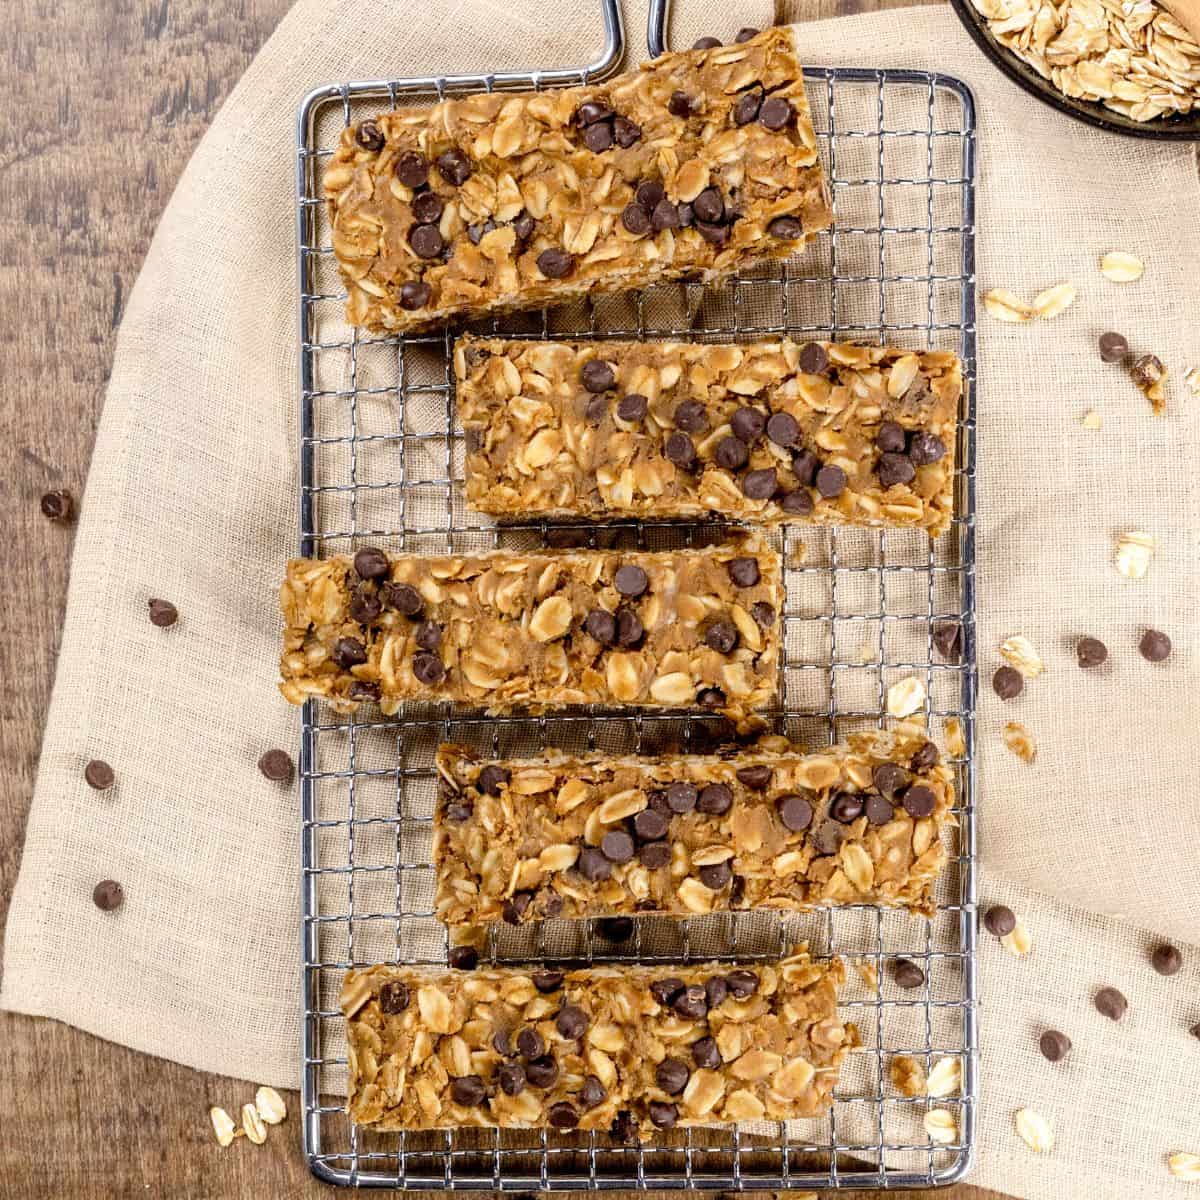 5 nut free granola bars on a metal cooling rack on a wood table. A soft linen is under the granola bars. Toasted oats and mini chocolate chips are sprinkled around.